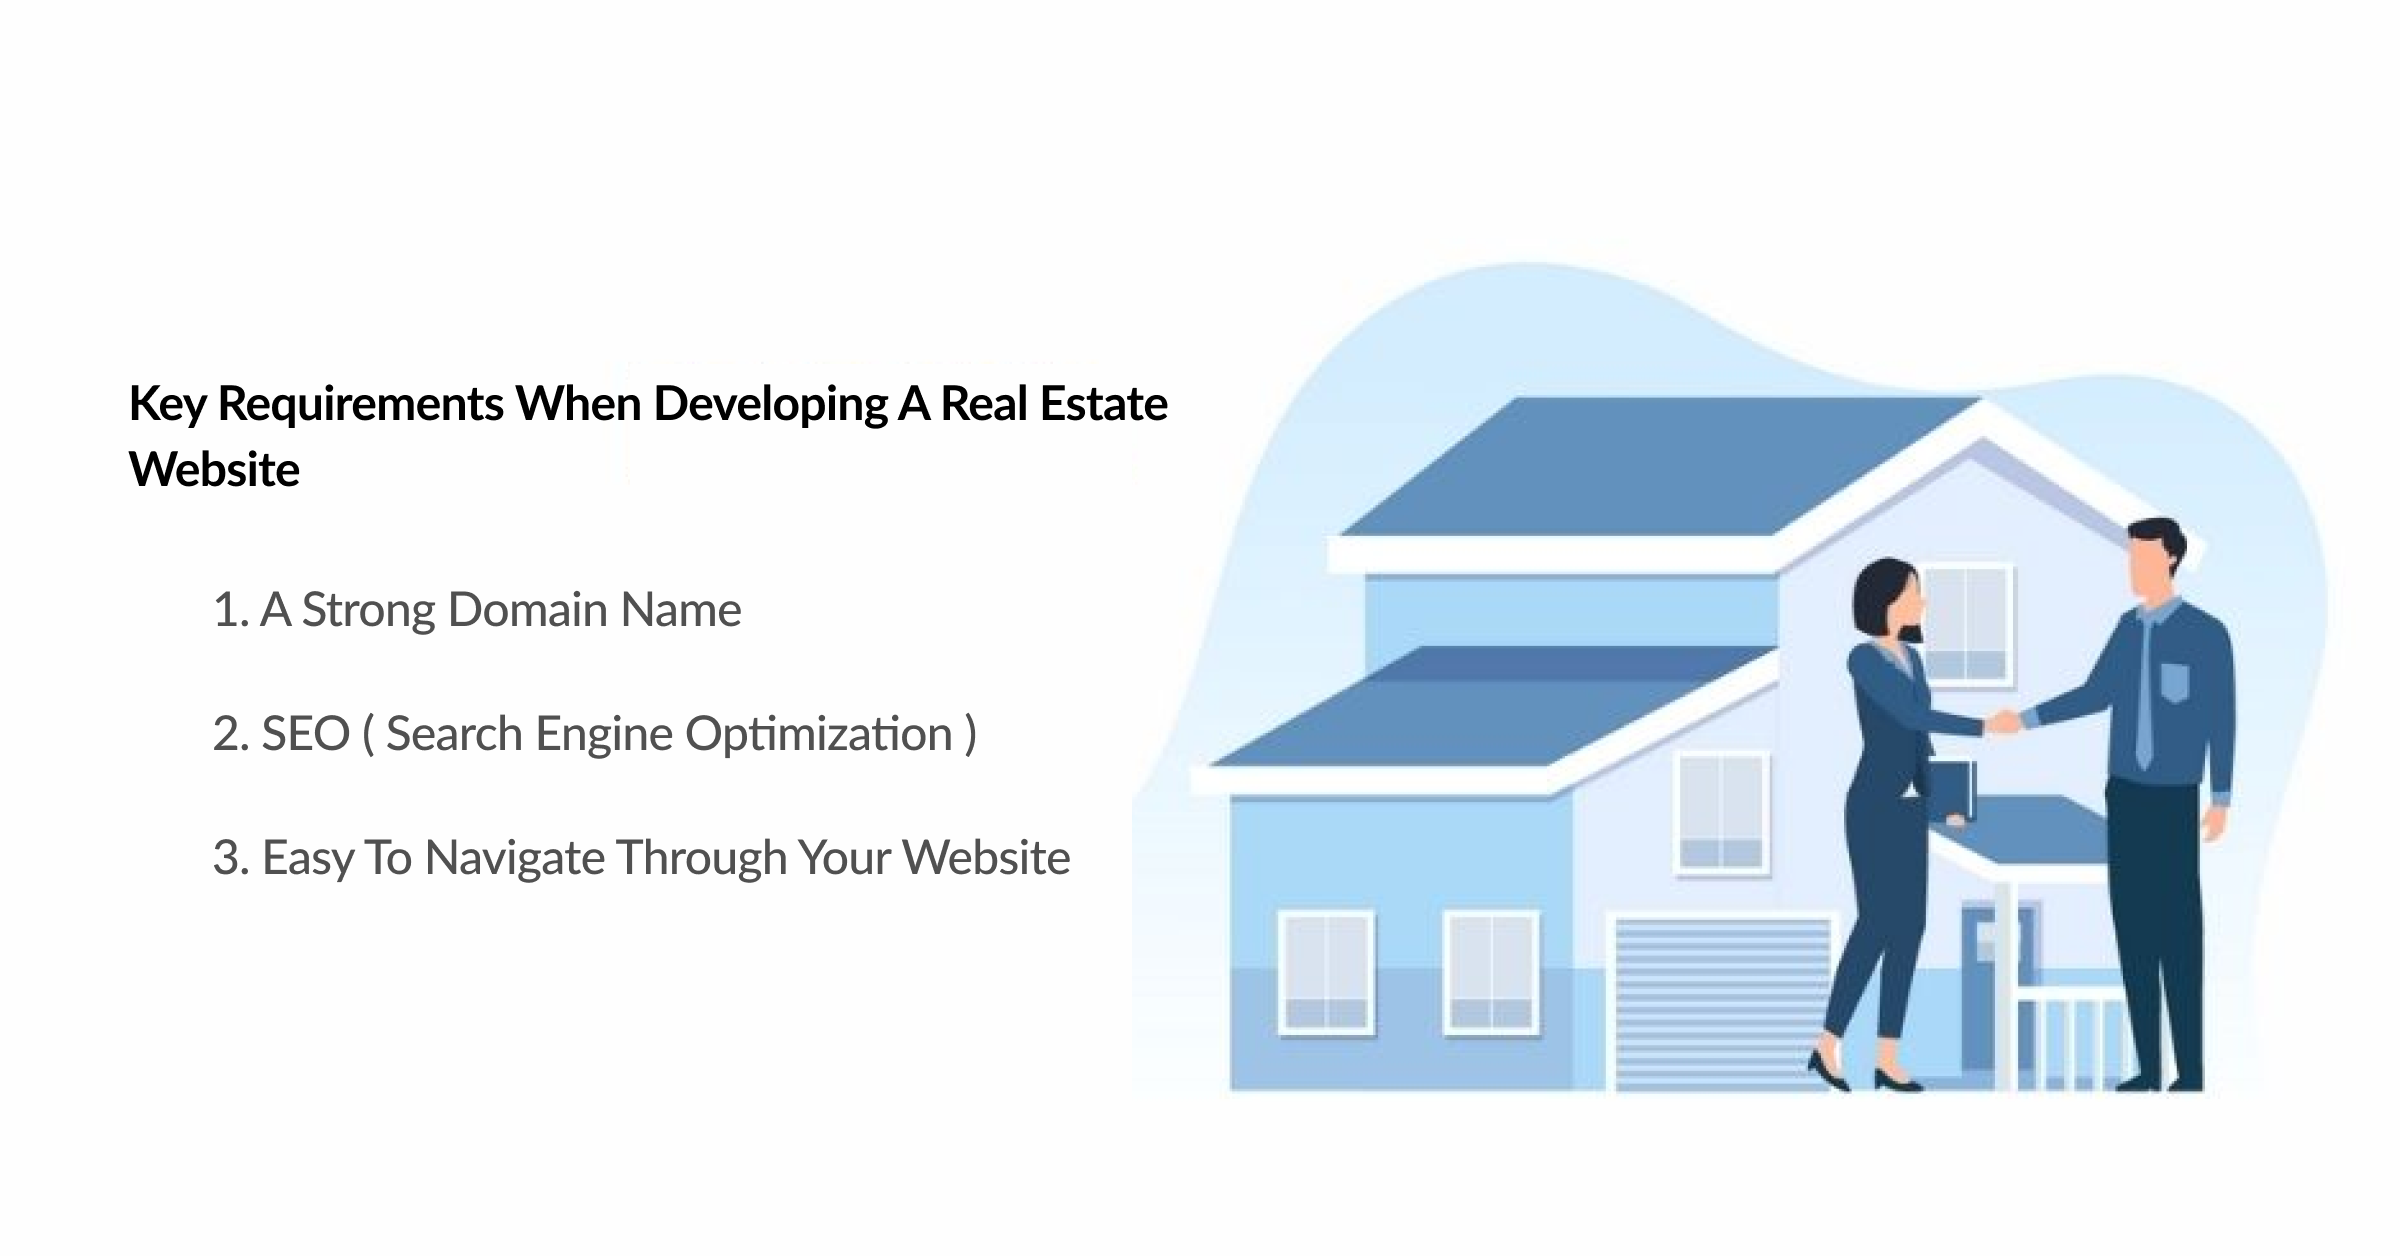 Key Requirements when developing a real estate website